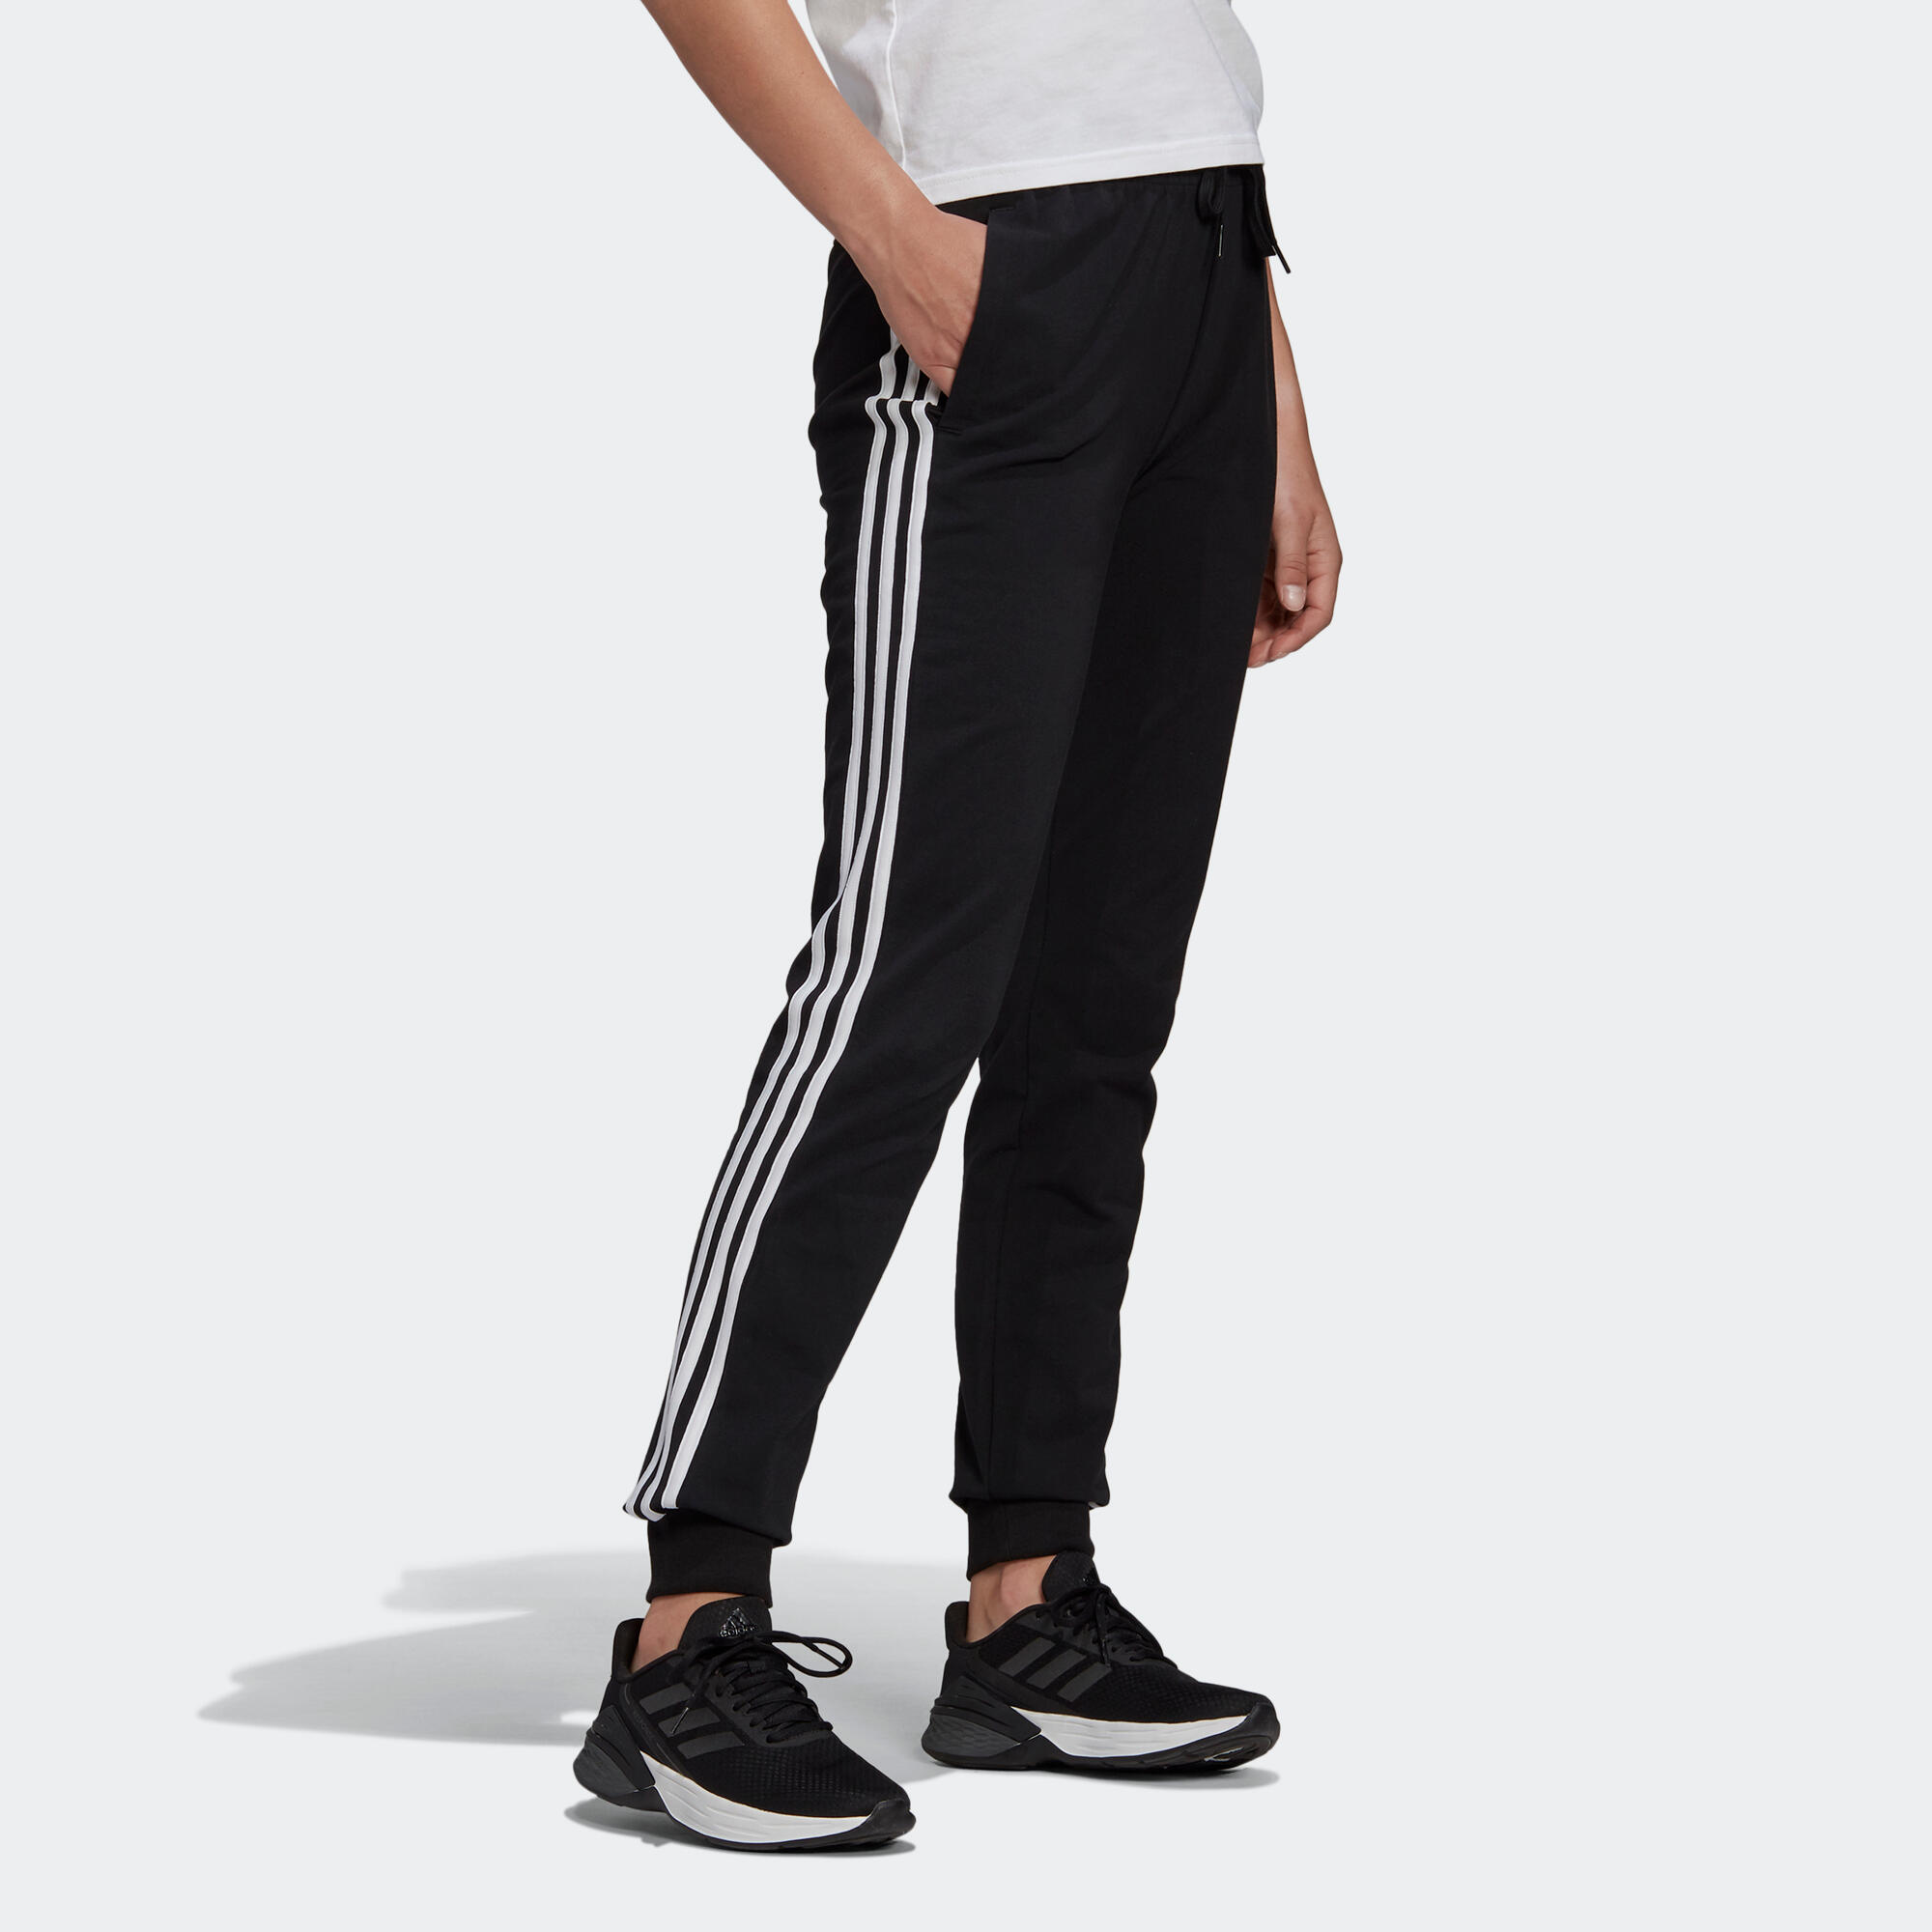 Women's Cotton-Rich Fitted Jogging Fitness Bottoms 3 Stripes - Black 3/6